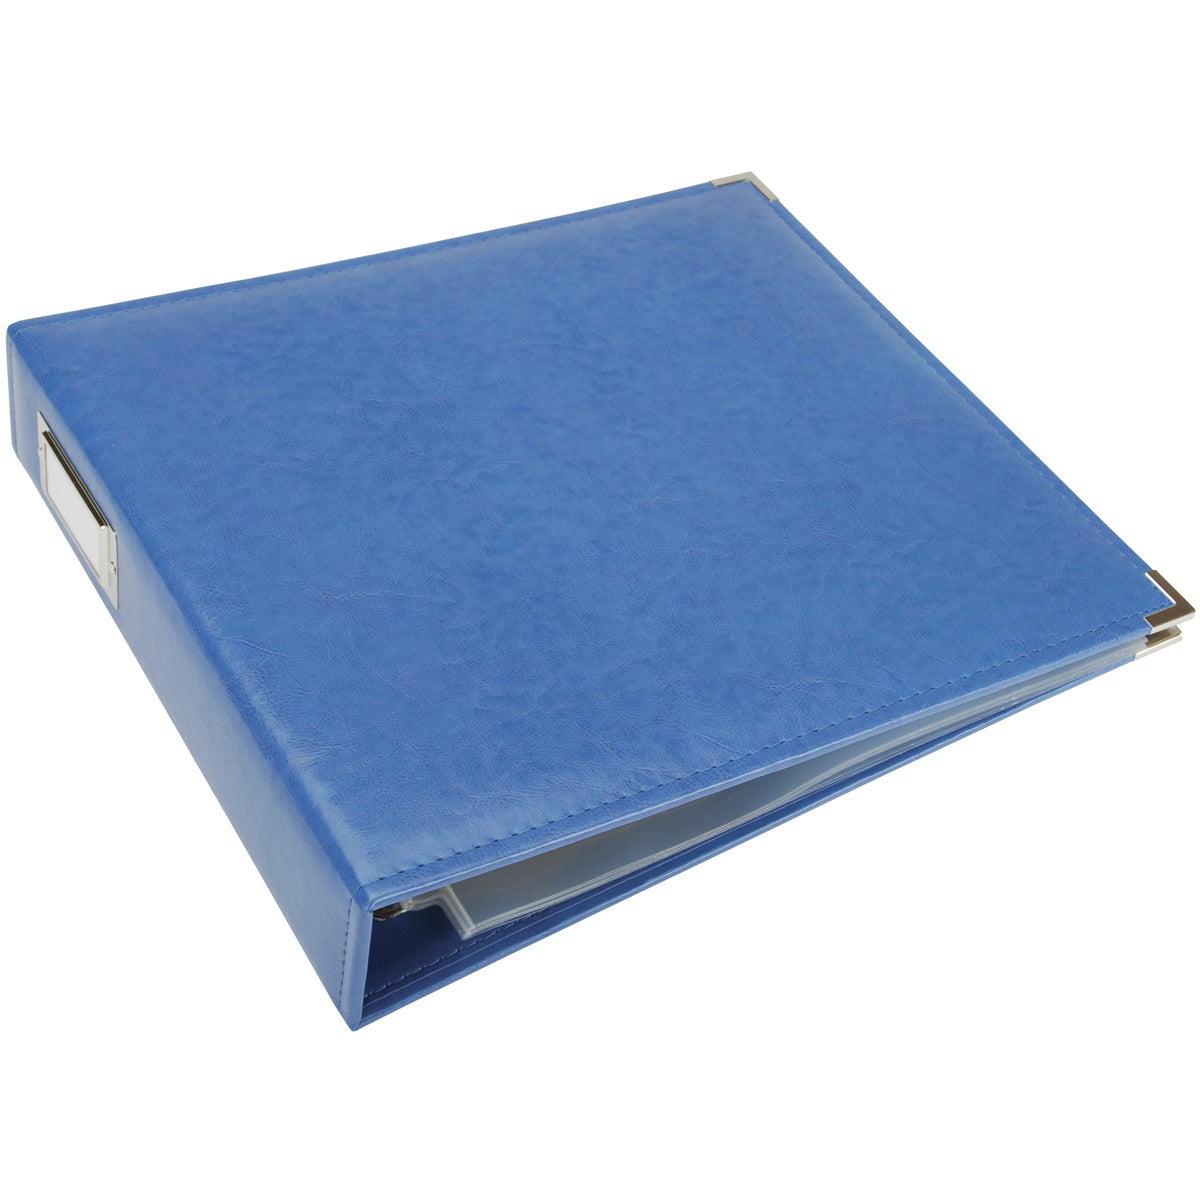 Peacock Blue Faux Leather D-Ring Scrapbook Album by Recollections® 